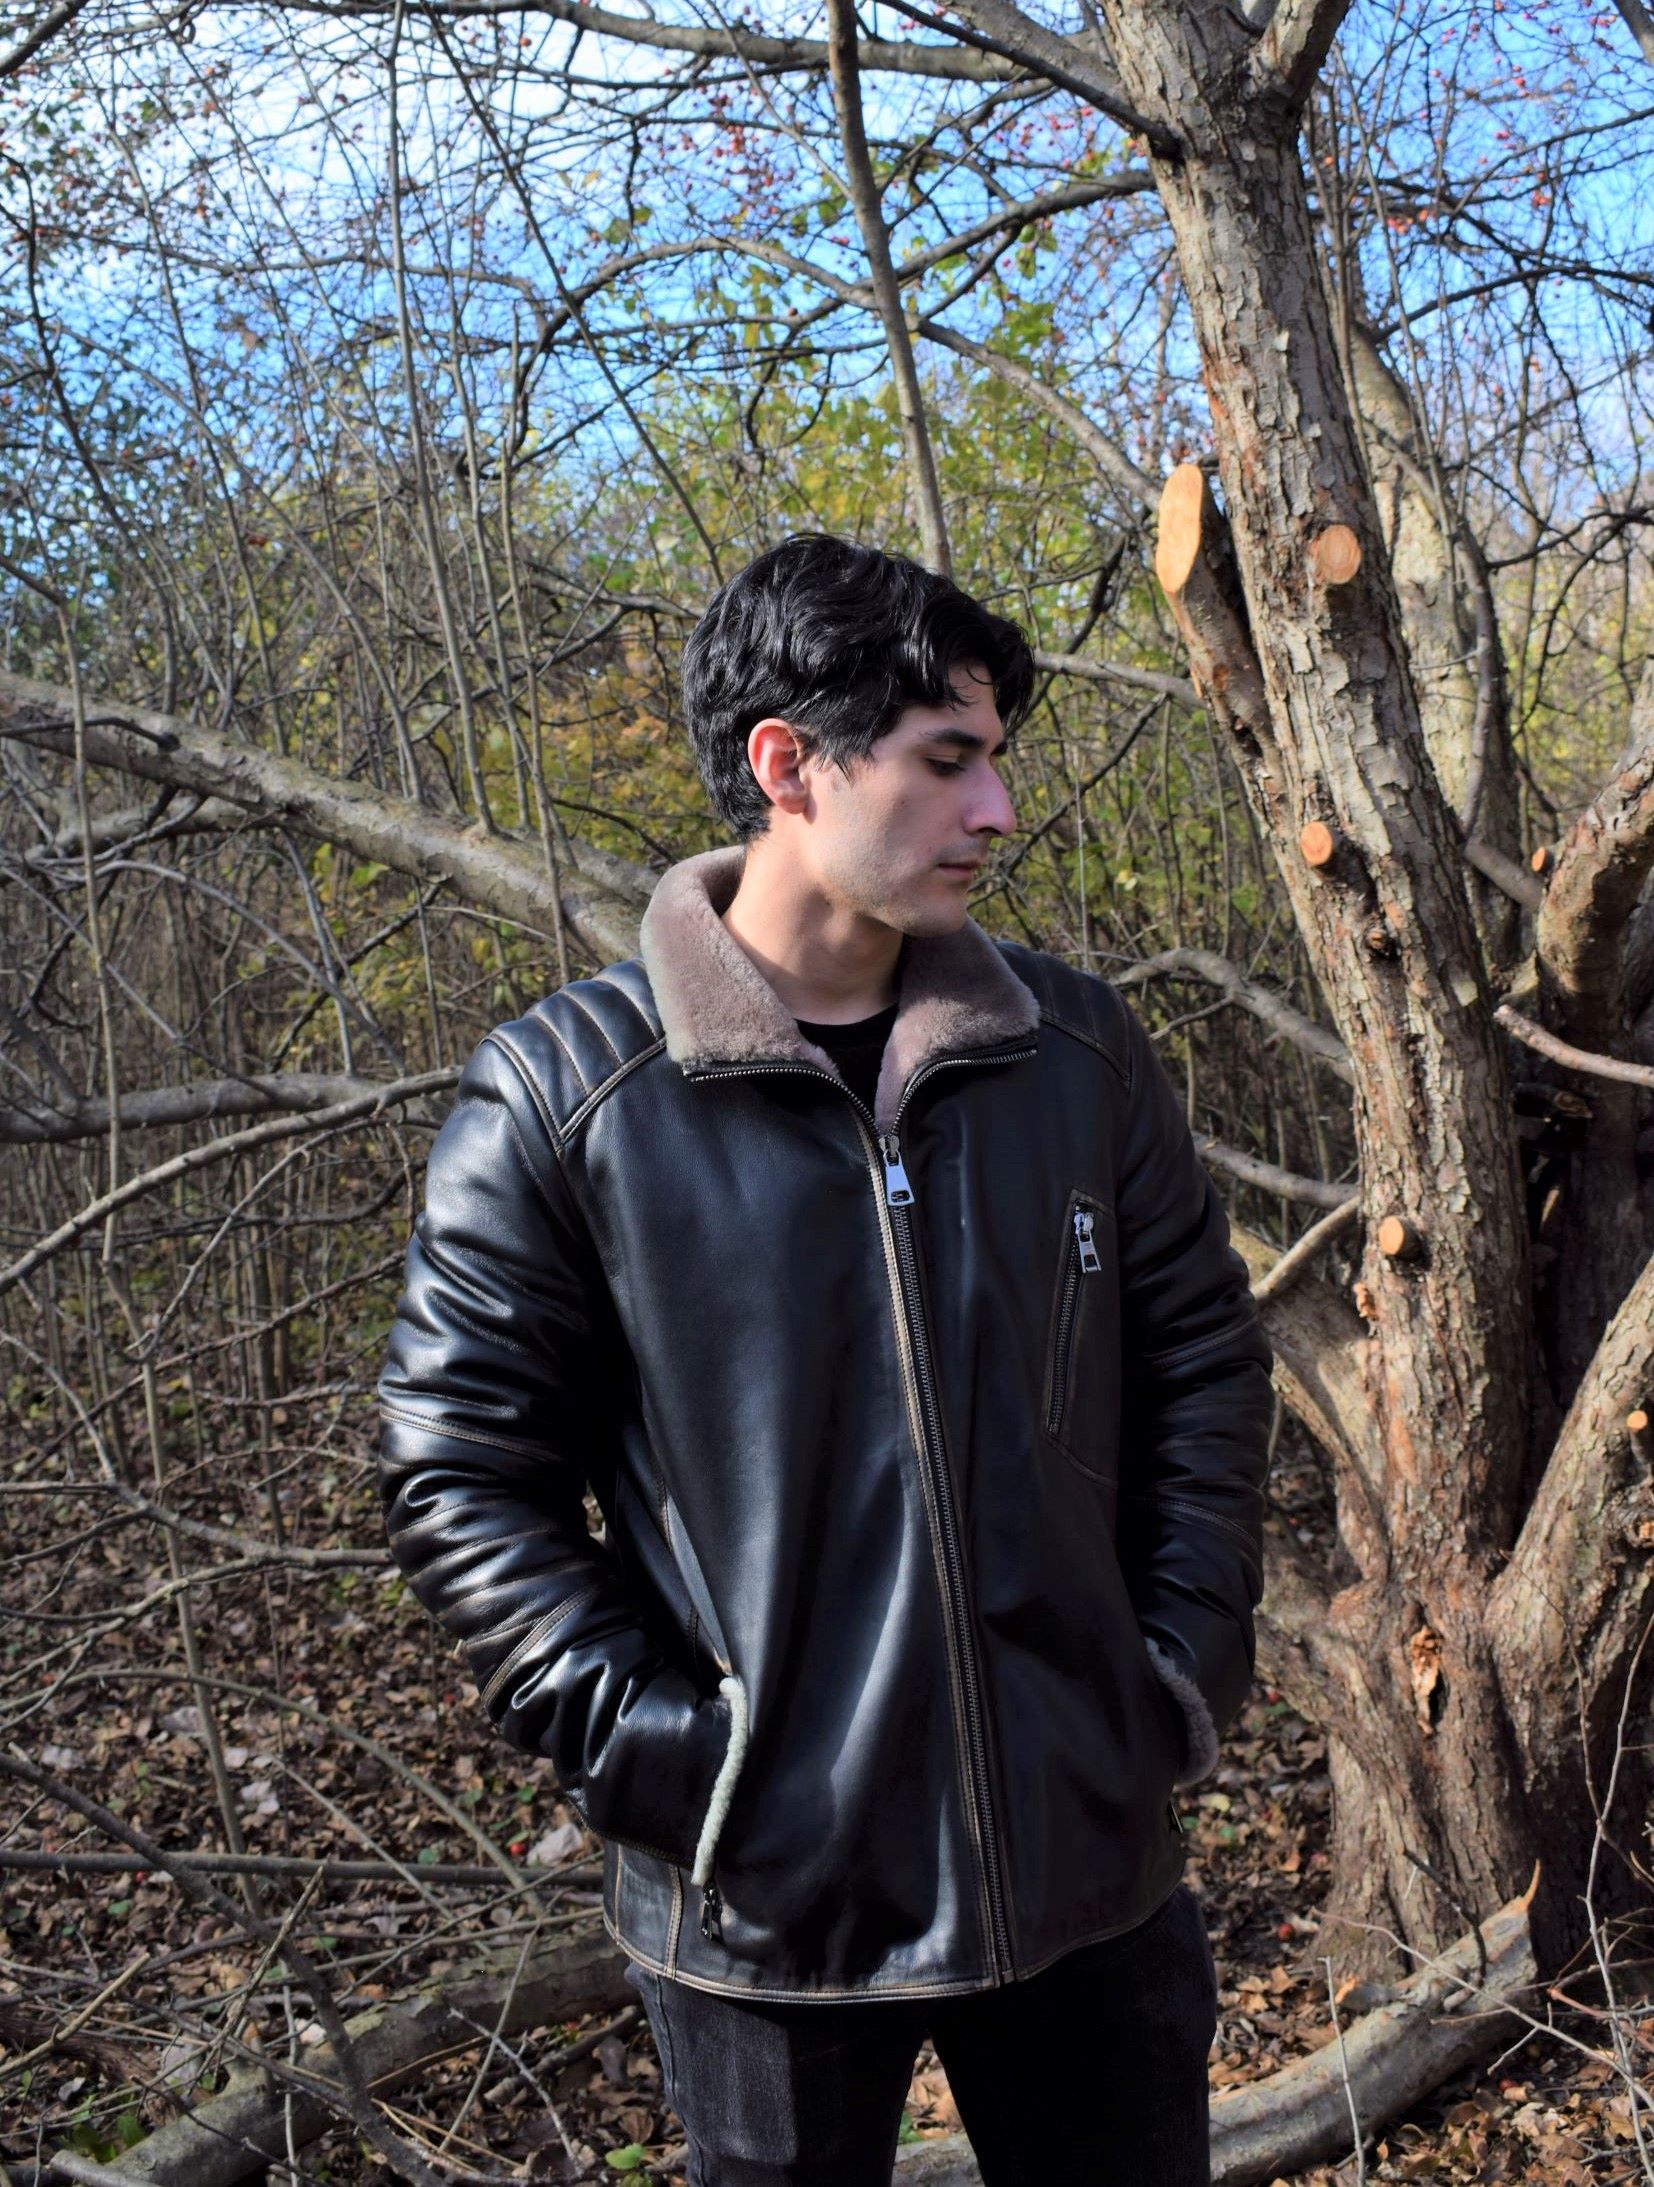 Man wearing a leather jacket lined with fur standing in a wooded area